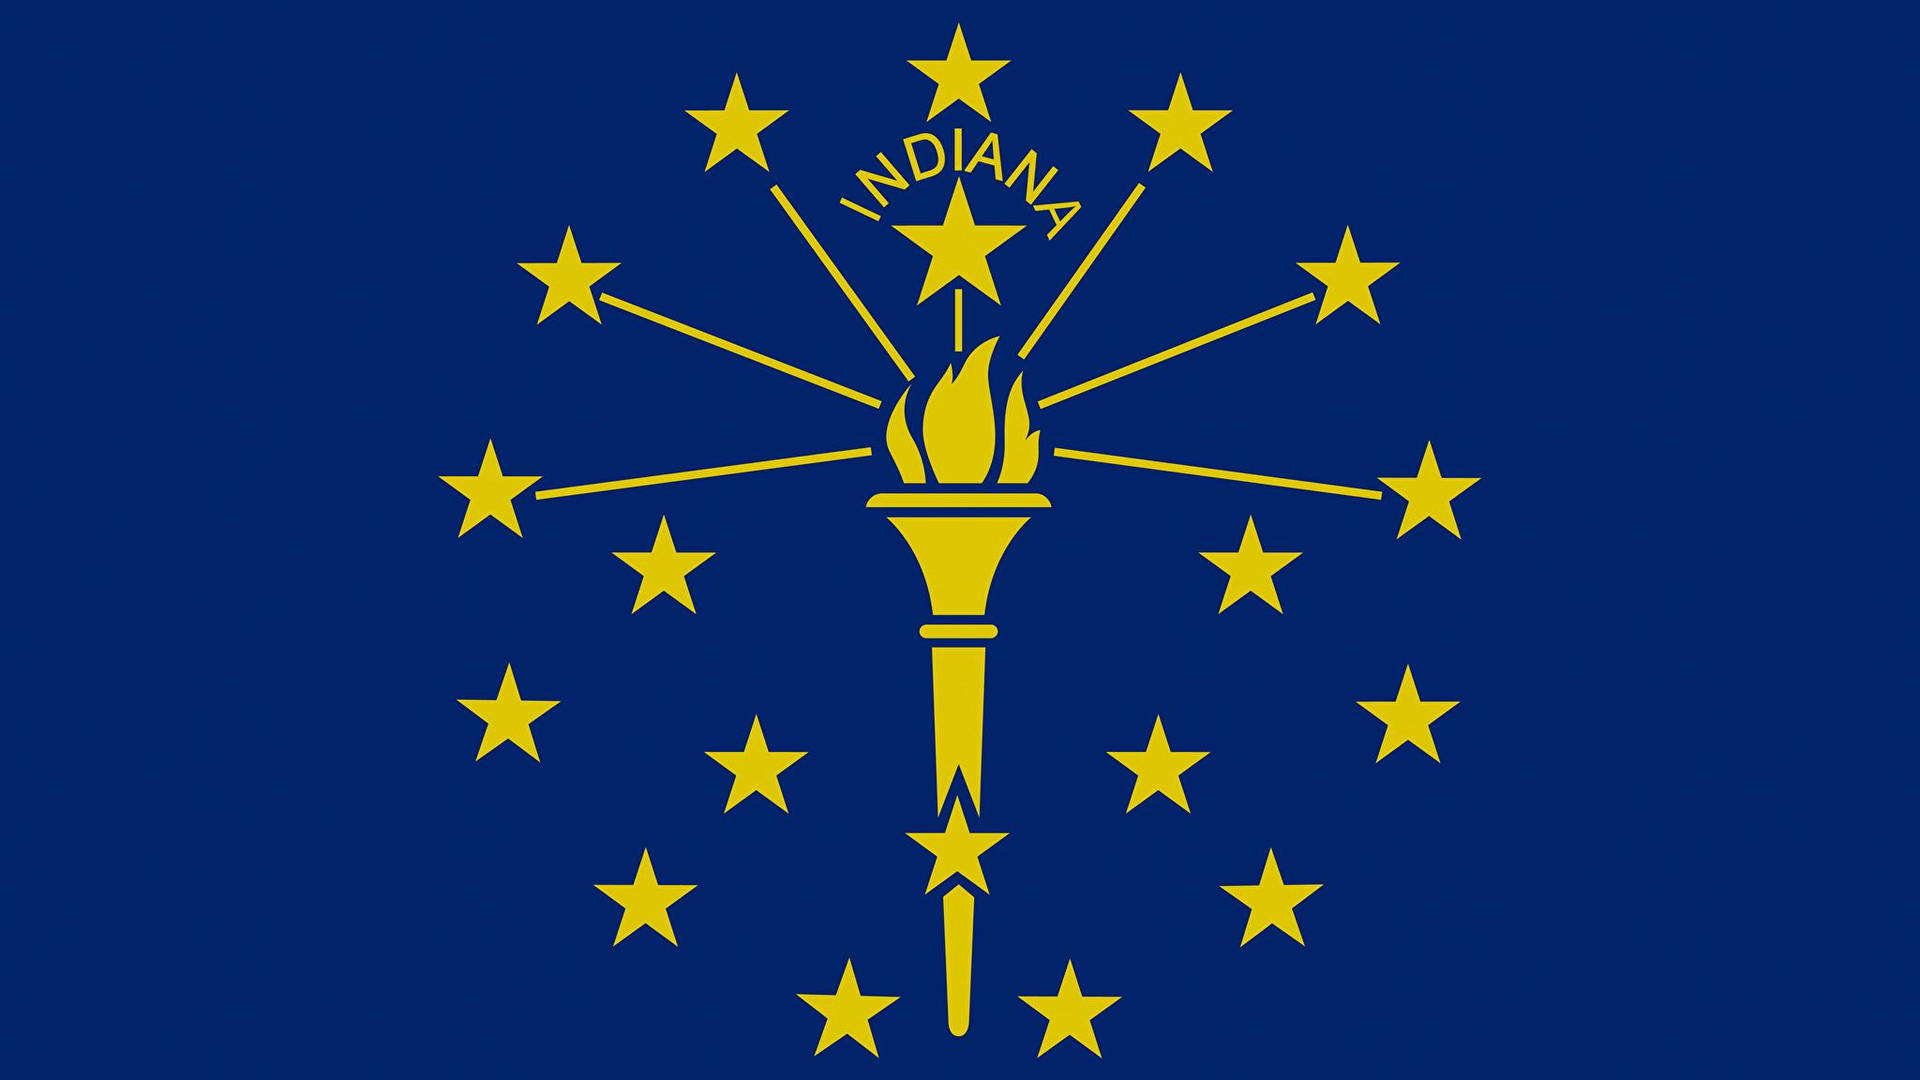 Indiana Flag Zoomed In Wallpaper